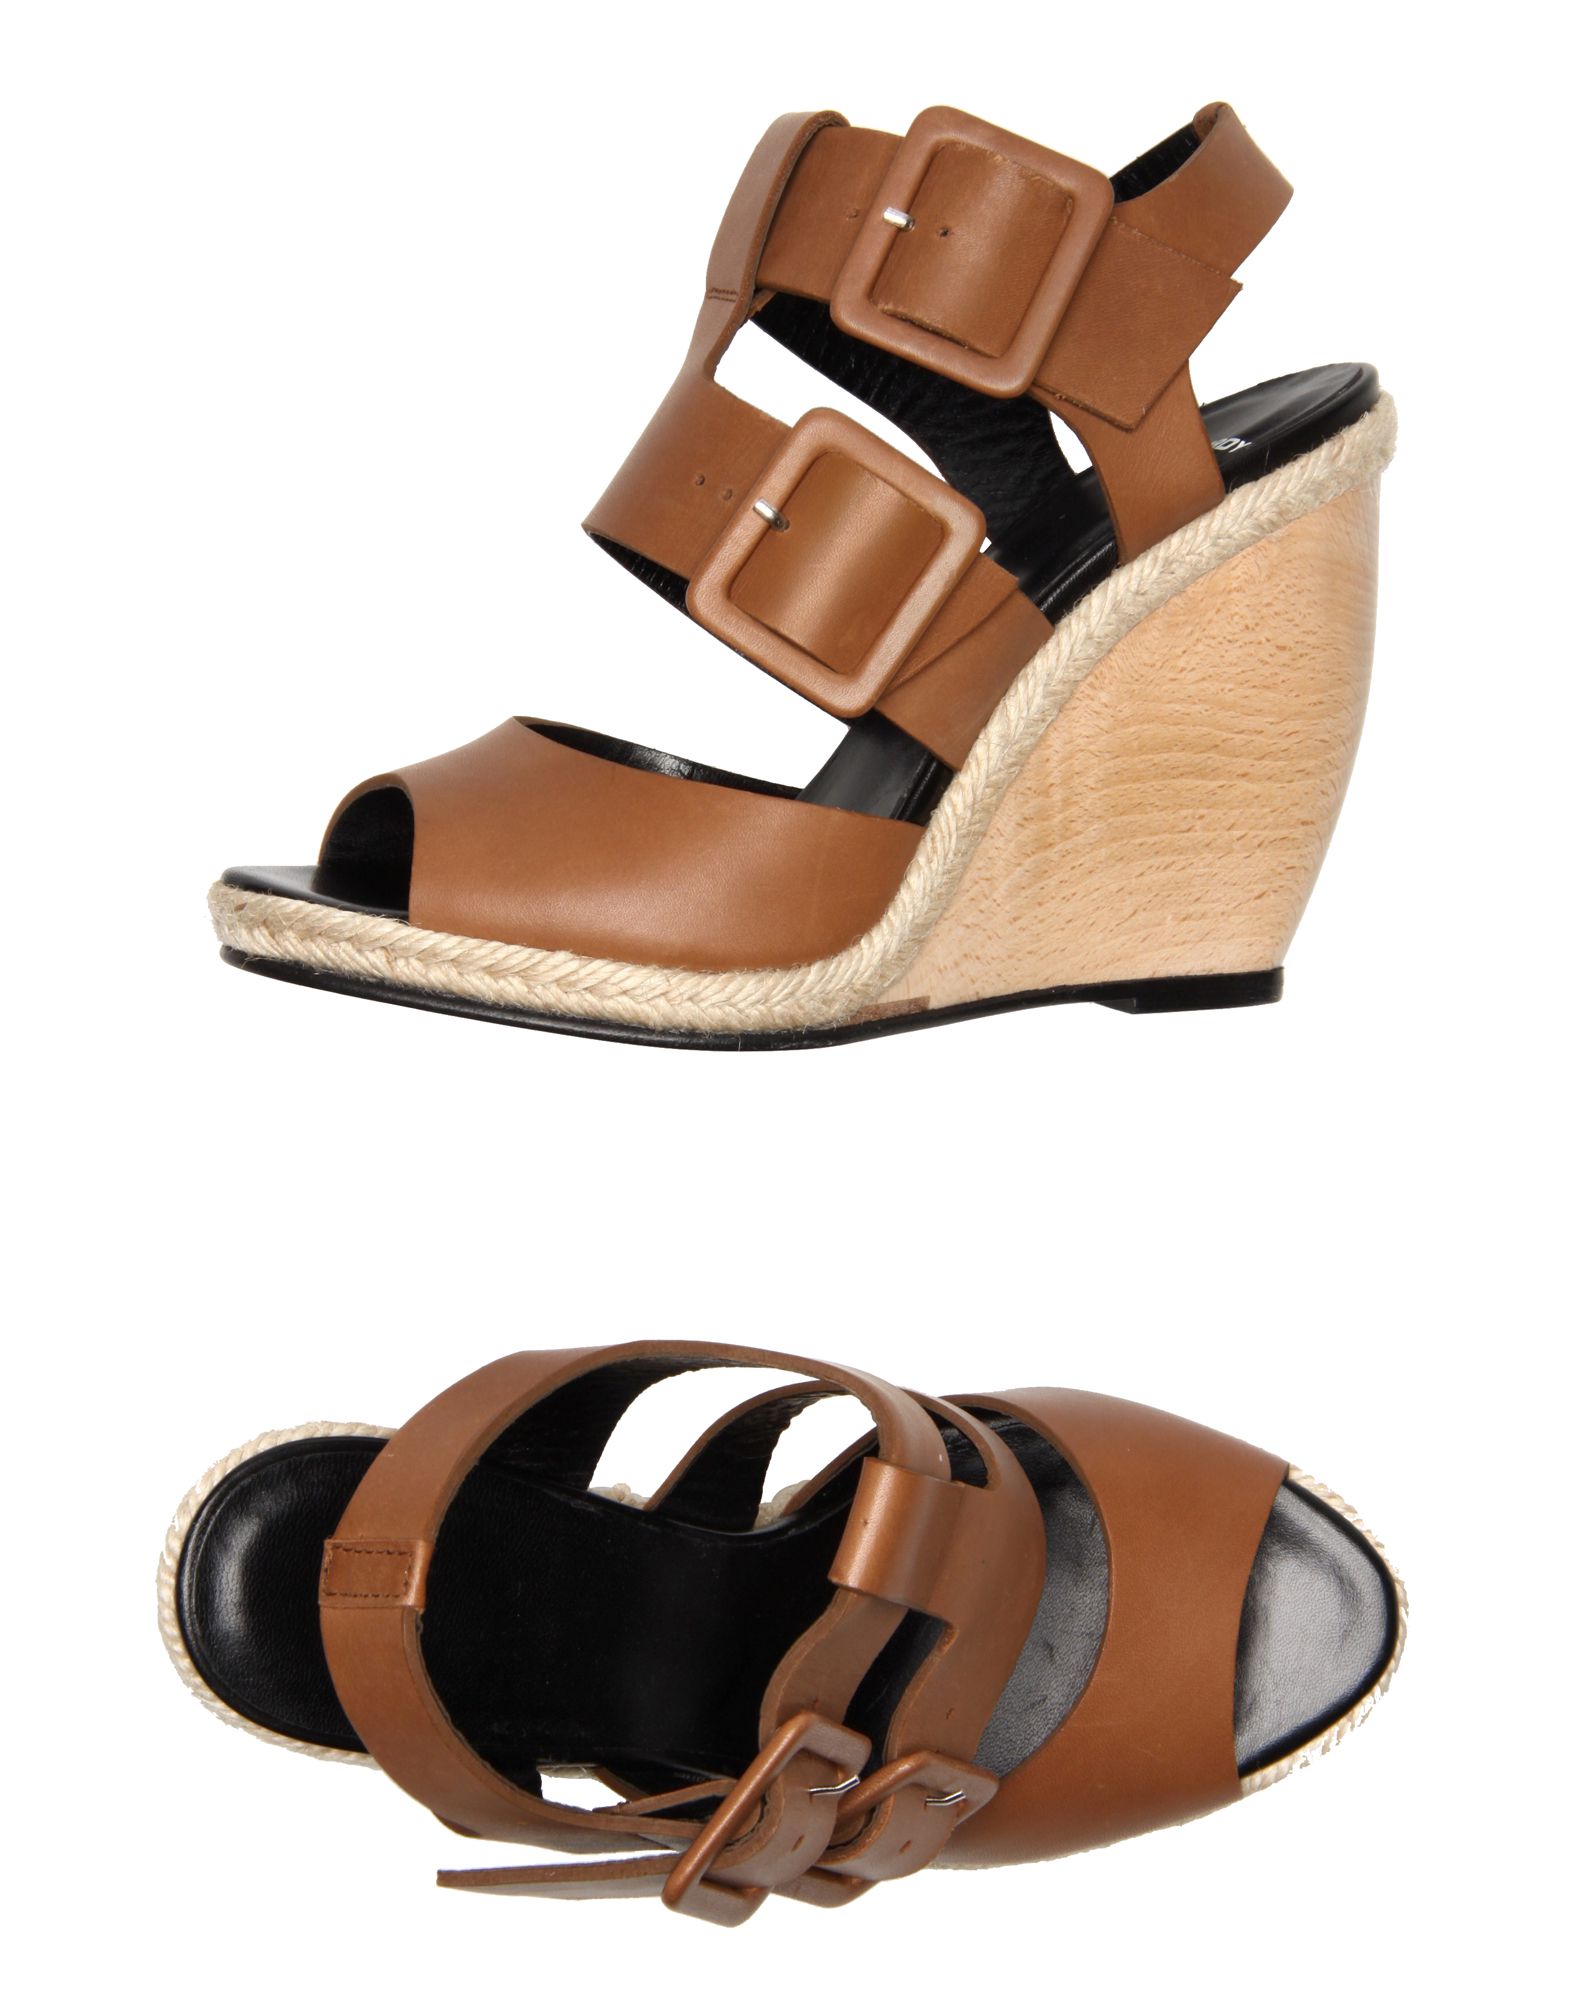 Work-Appropriate Wedge Sandals That You'll Want to Wear Everywhere